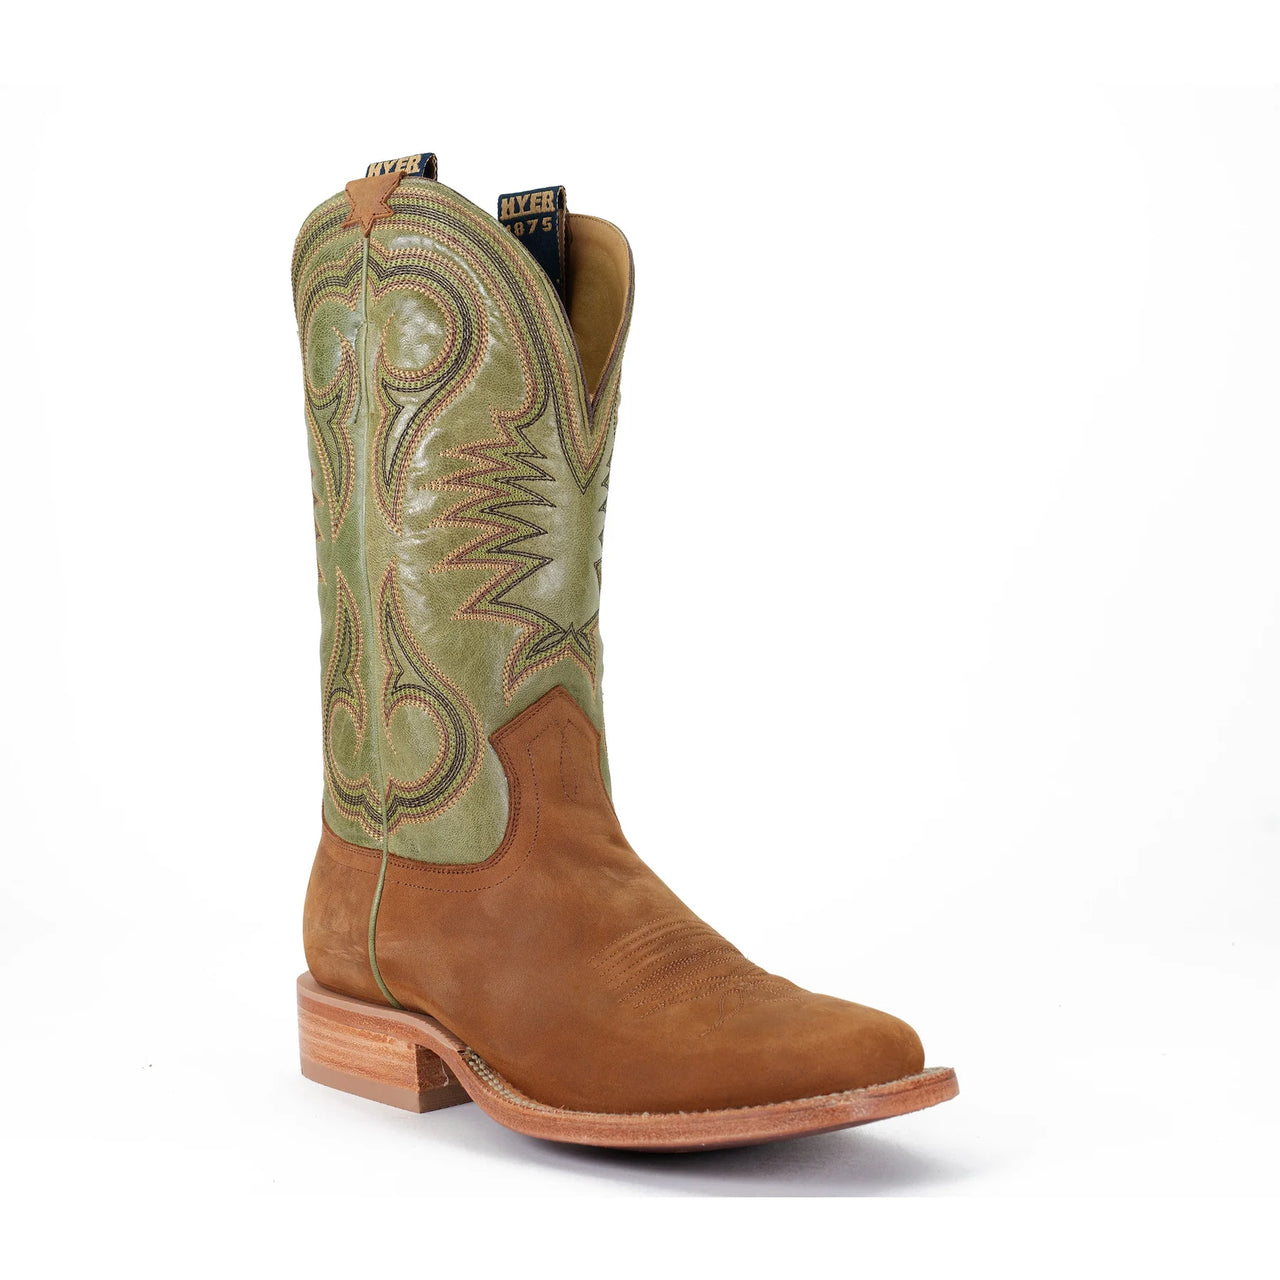 Hyer Men's Codell Western Boots - Clay Mule Cowhide